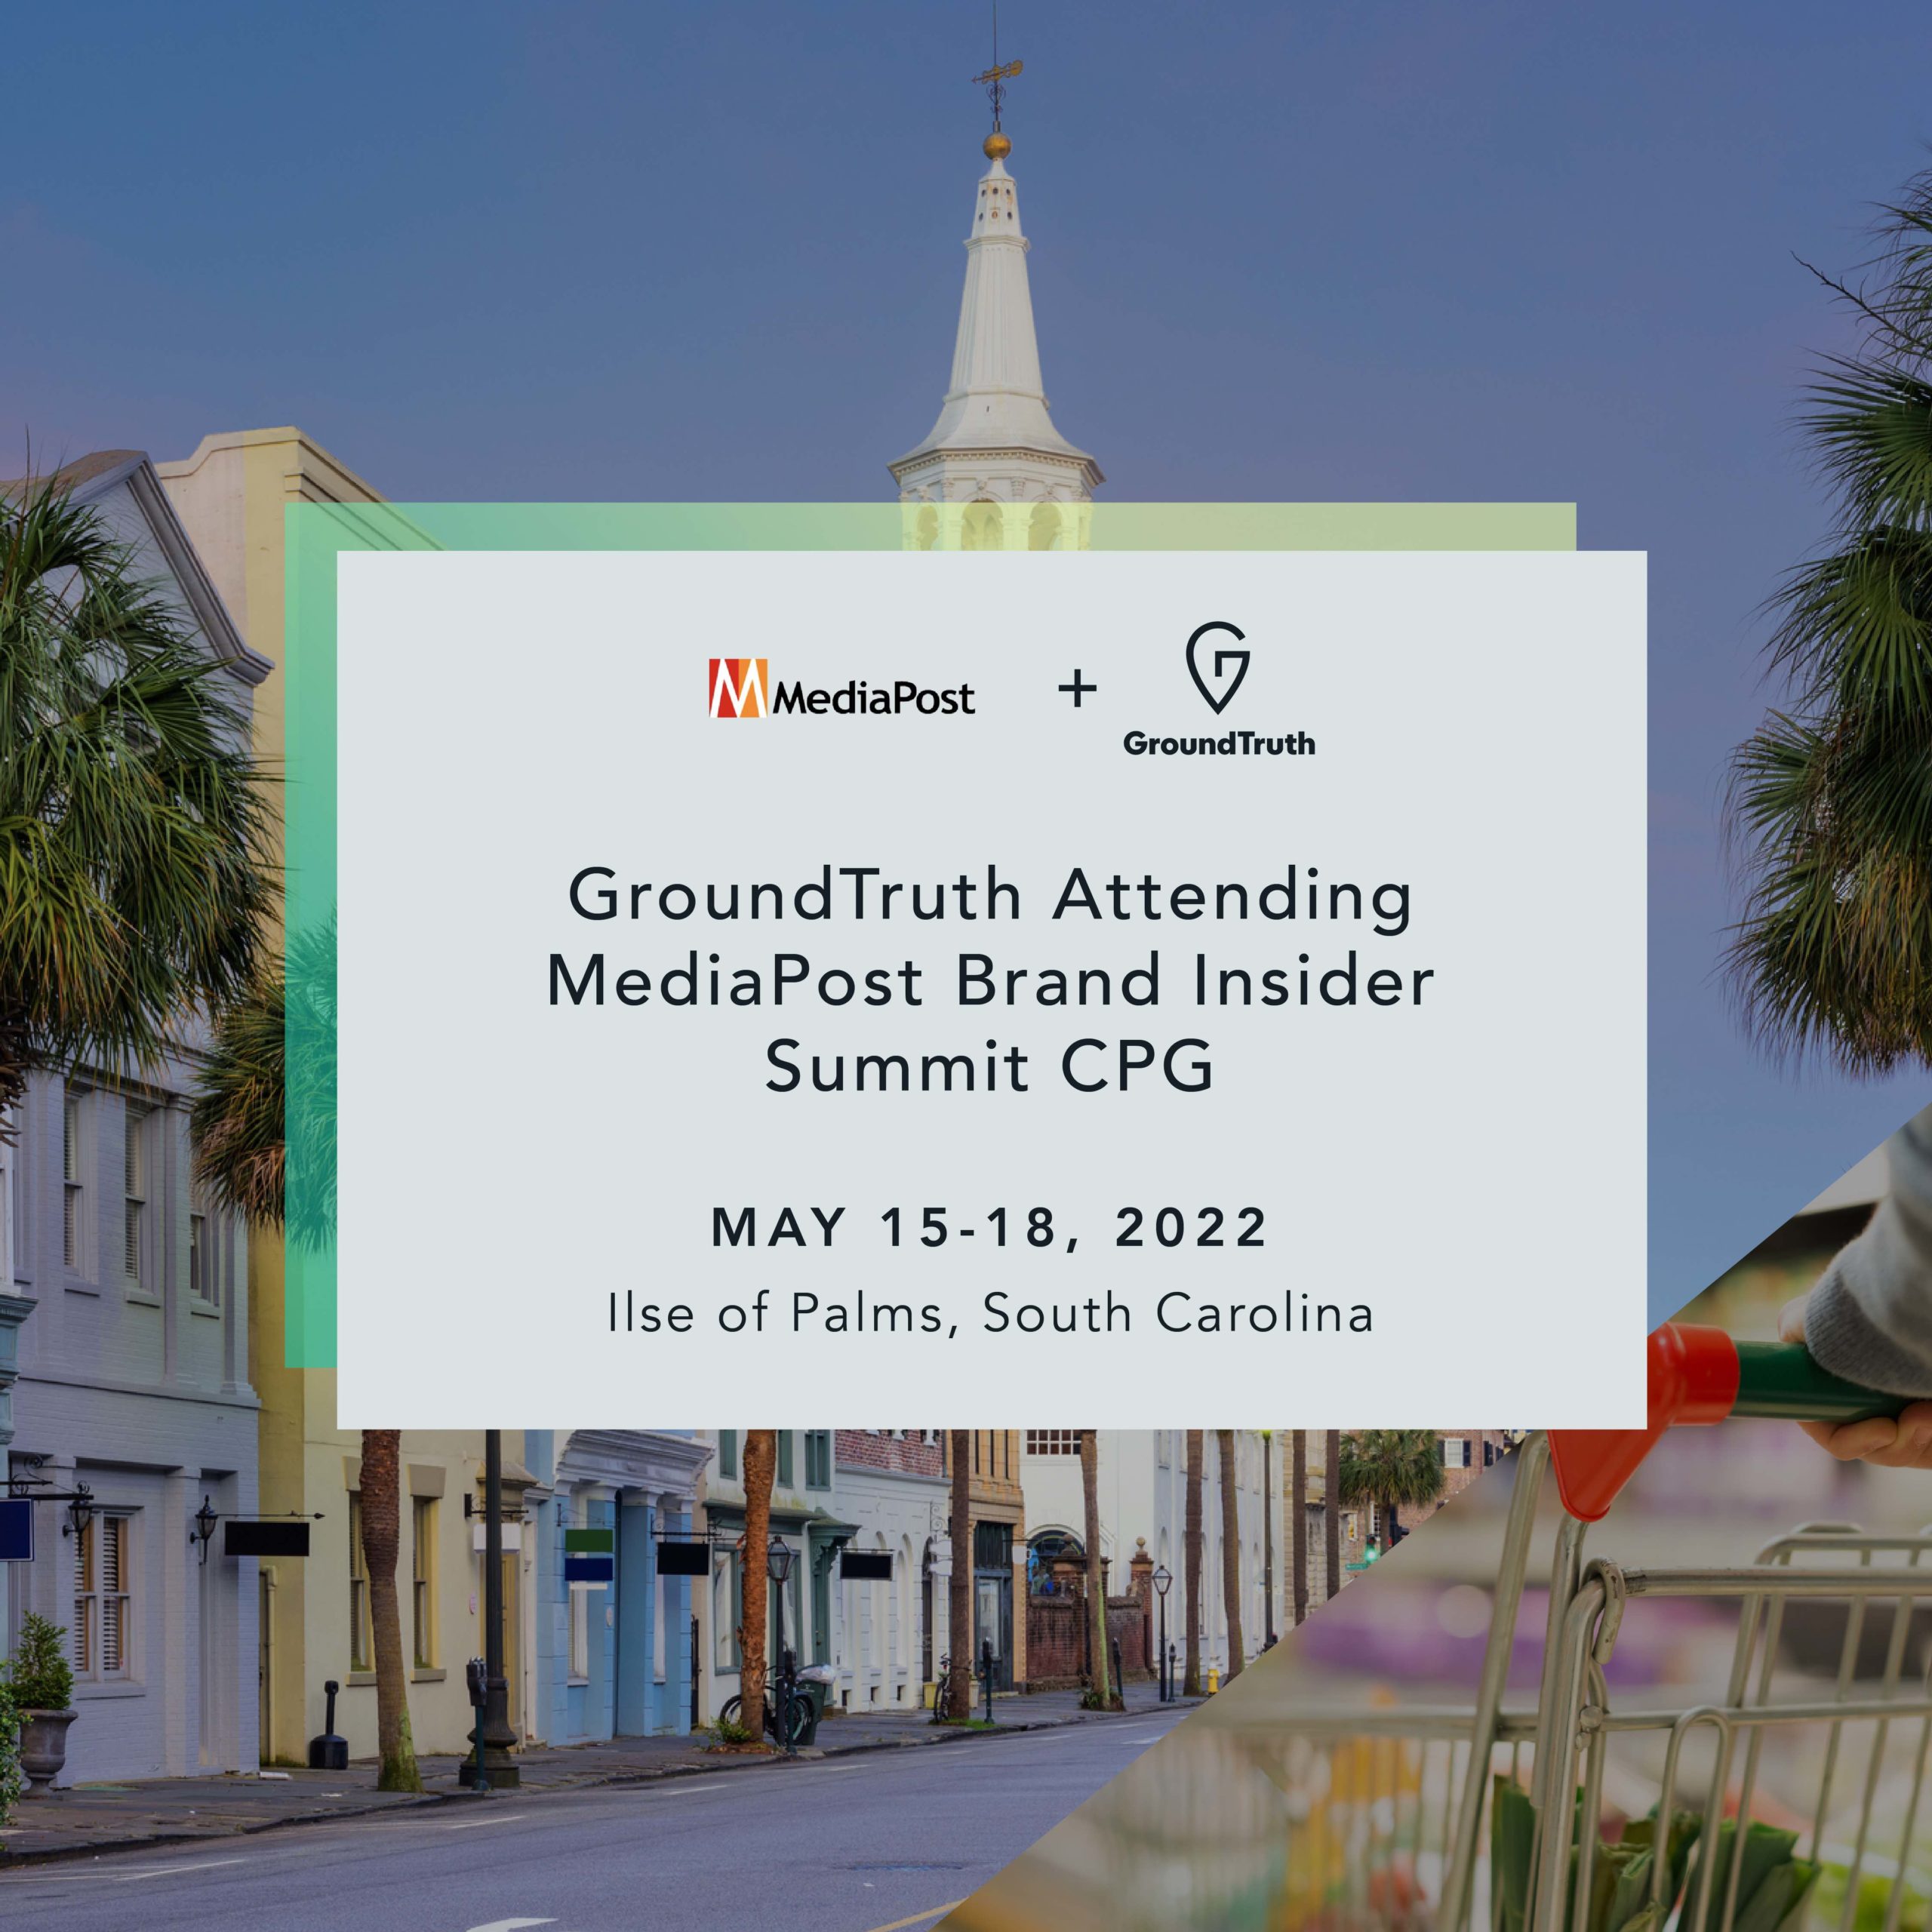 GroundTruth is attending MediaPost Summit